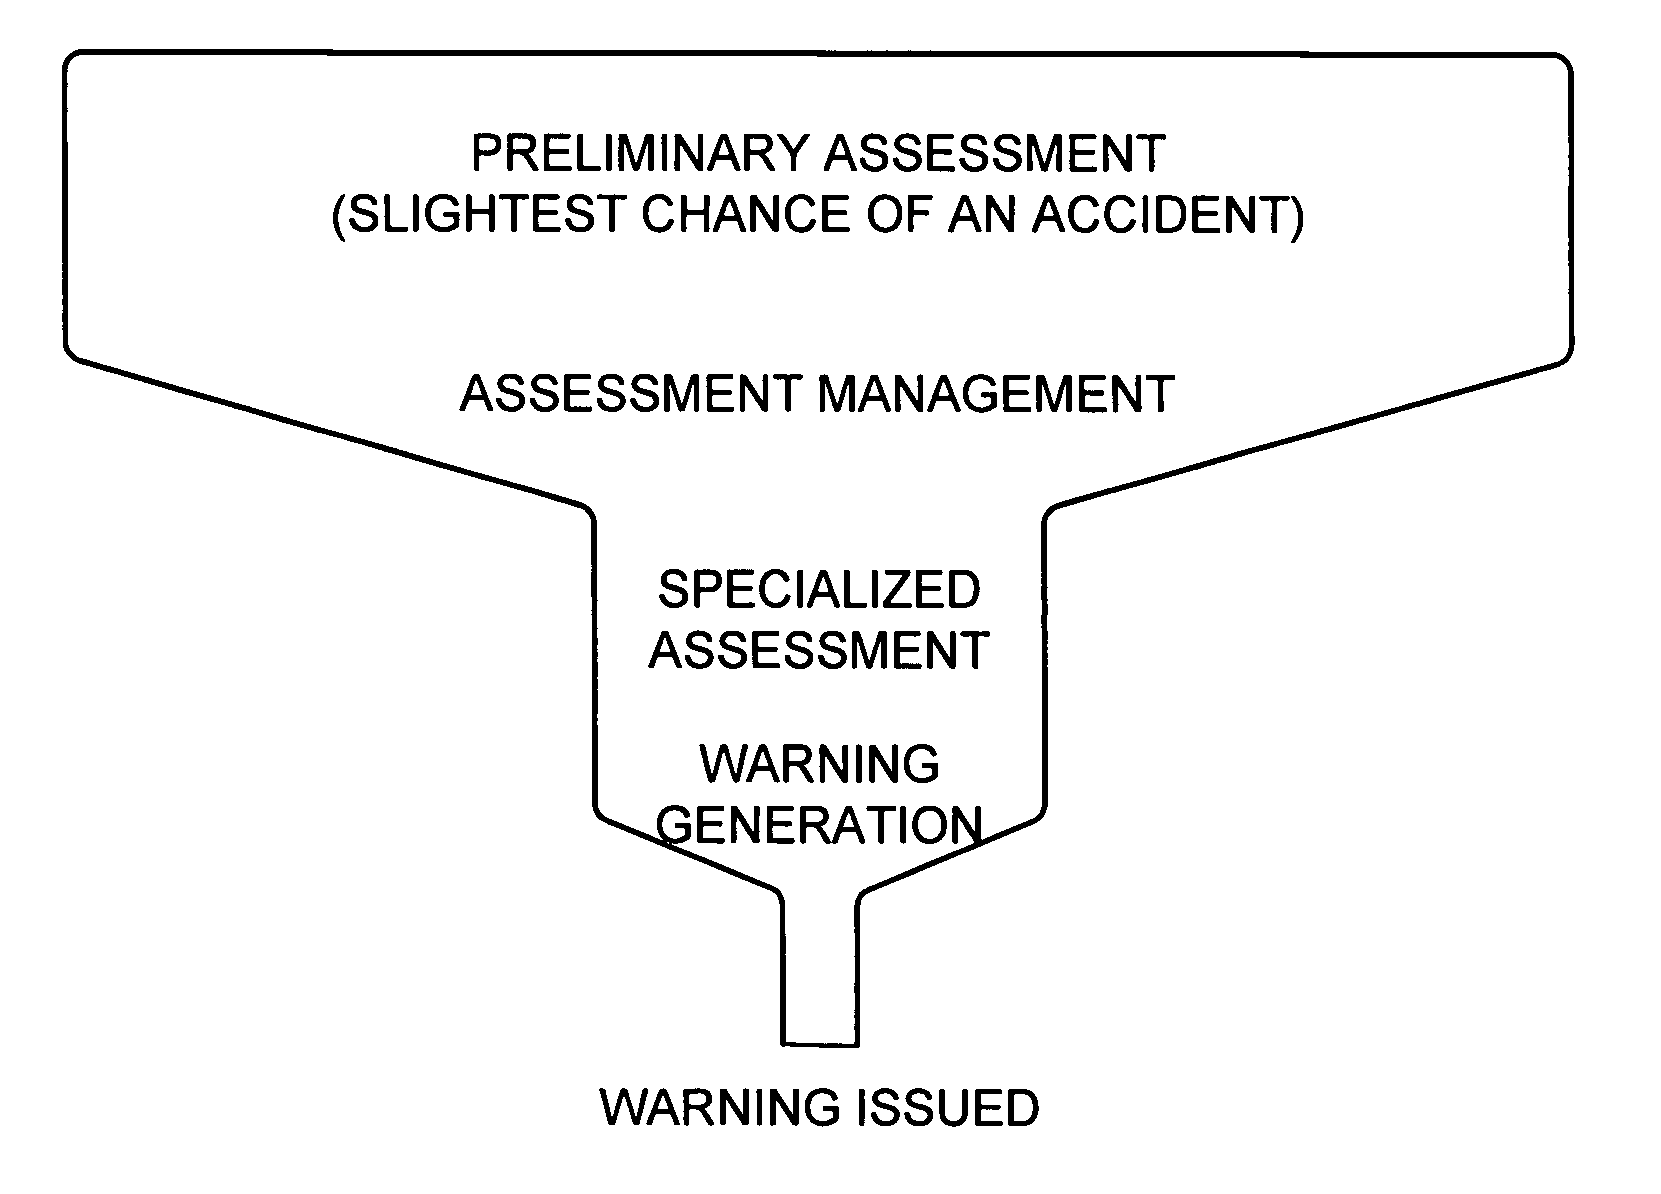 Two-level grouping of principals for a collision warning system